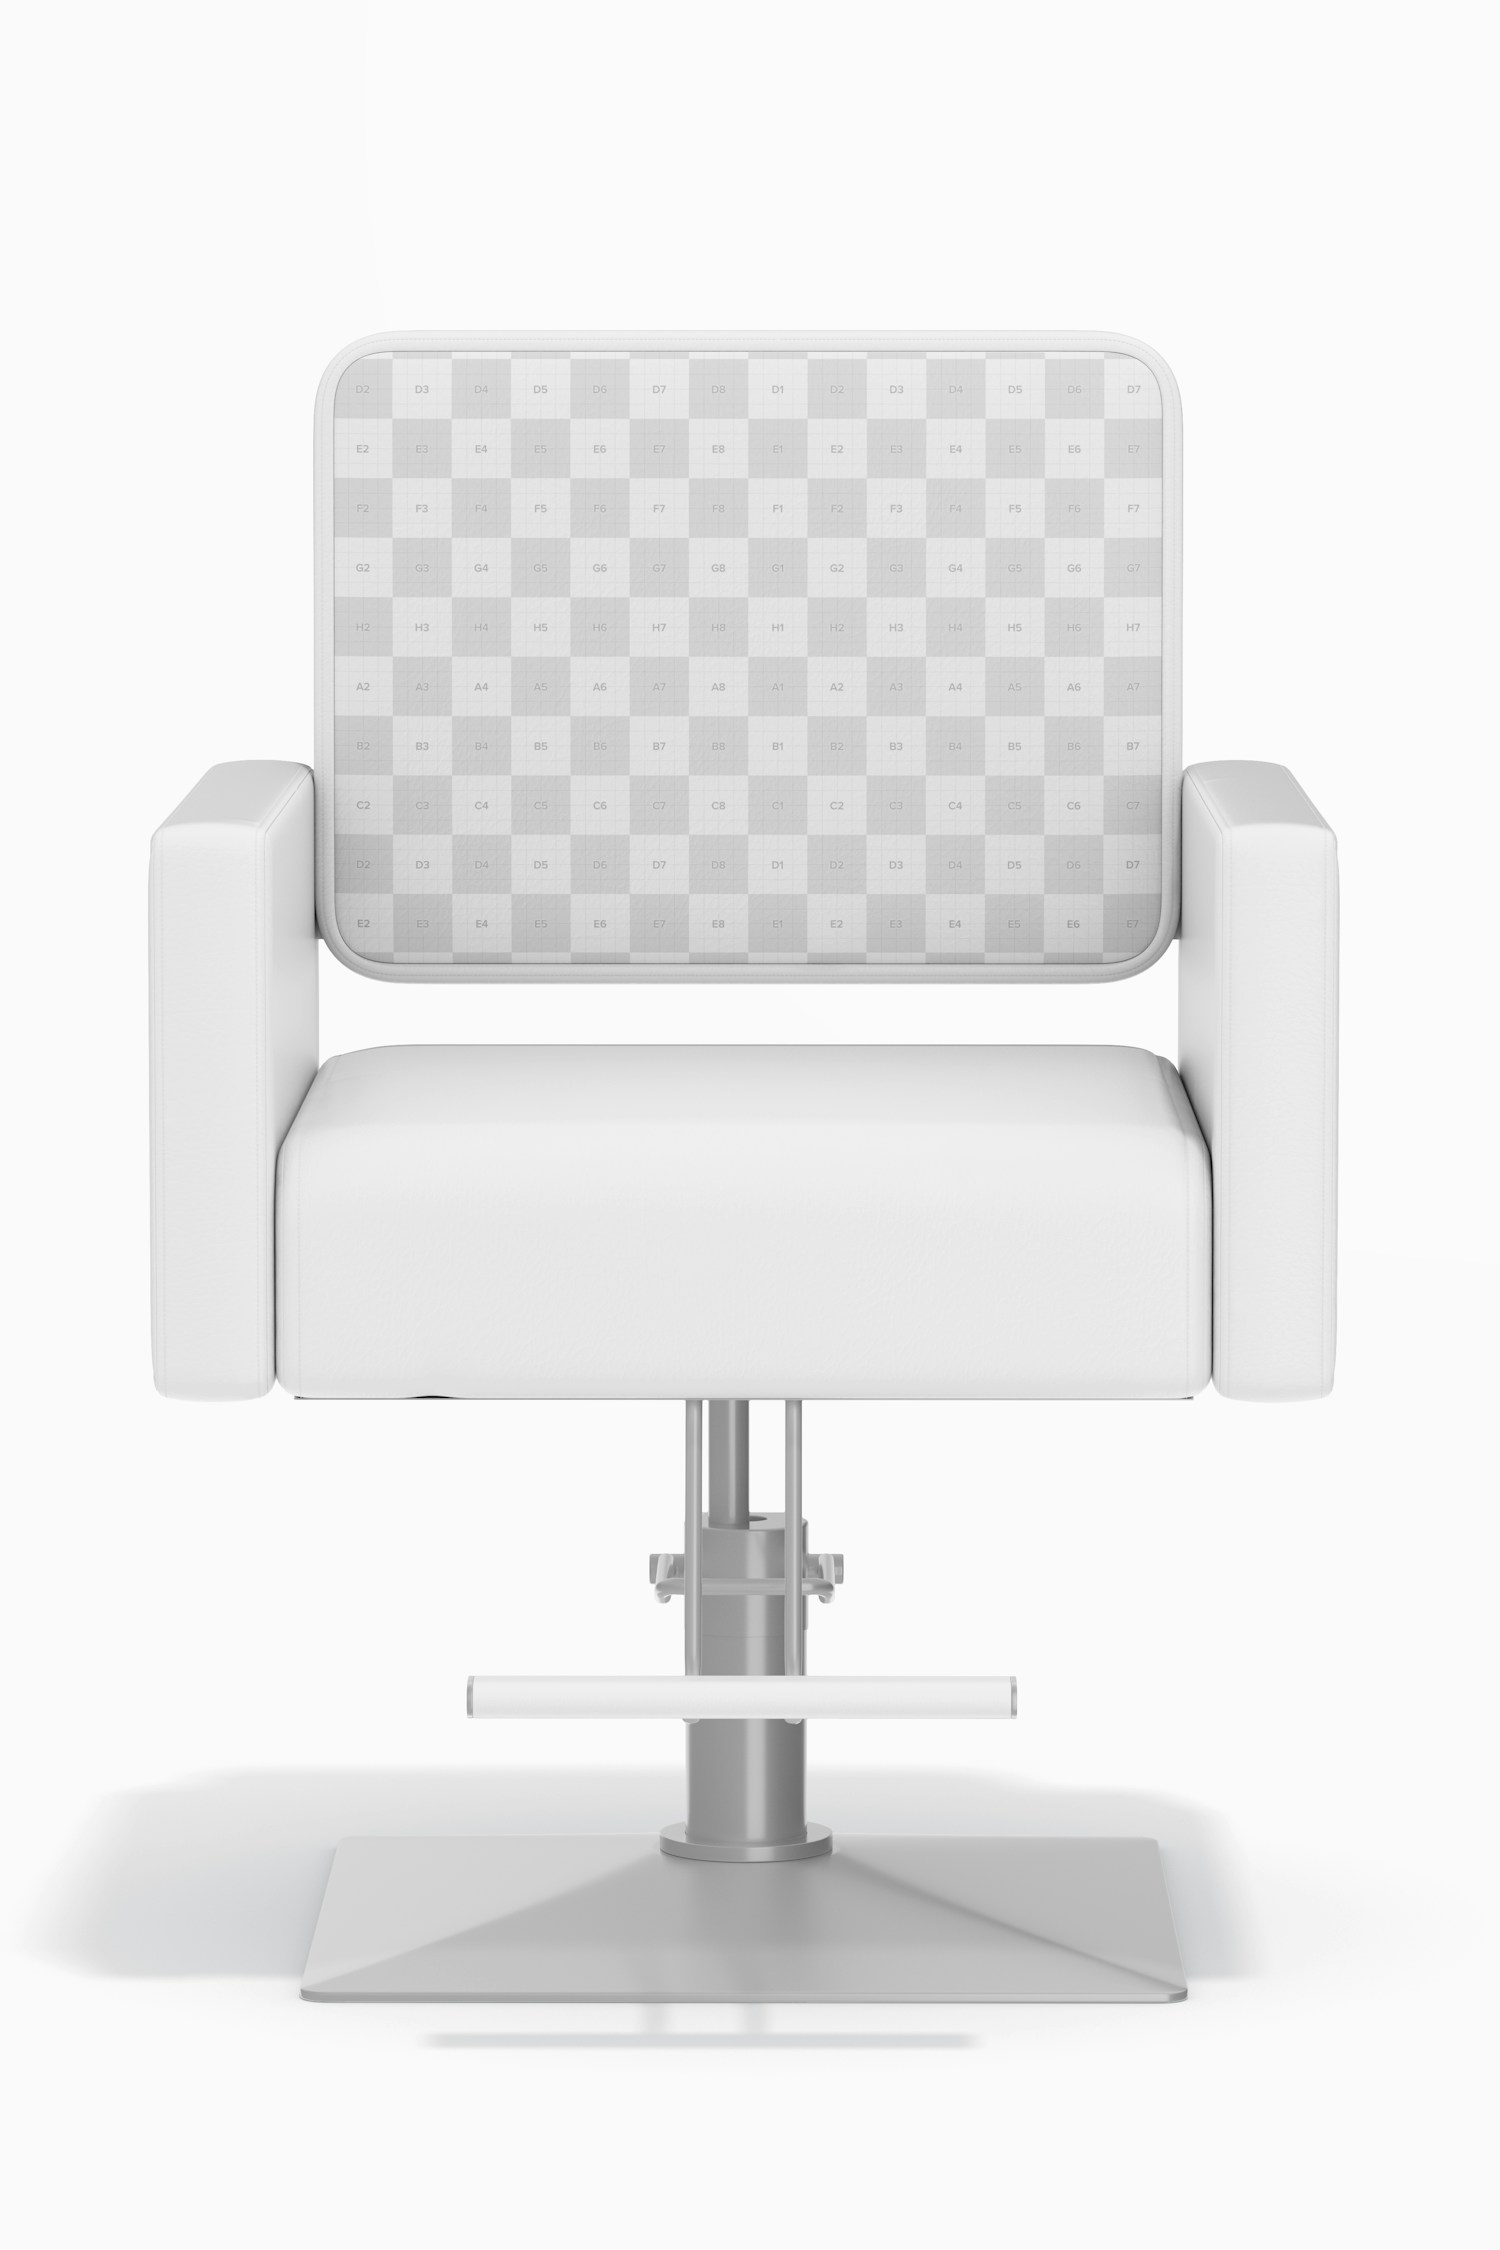 Barber Chair Mockup, Front View